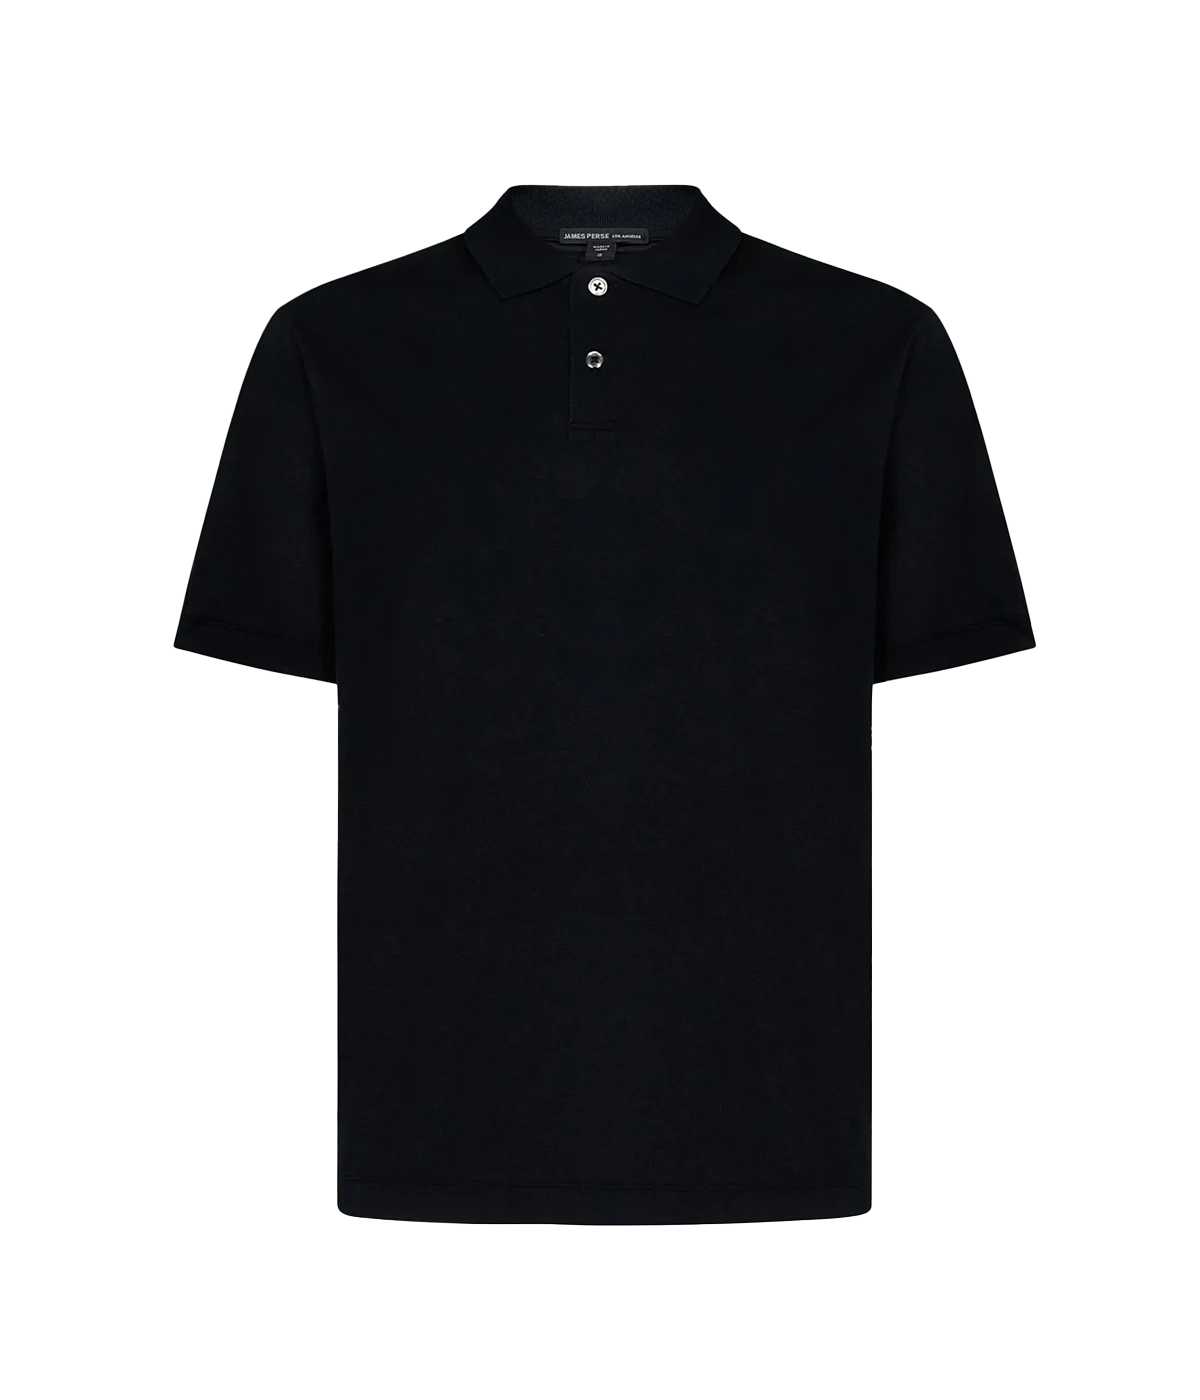 100 percent suvin cotton black jersey polo. Relaxed, polished look and fit with an ultra-soft, matte satin-like hand feel. Contrast ribbed knit collar and short sleeve hems and centre front polo placket with two button closures.